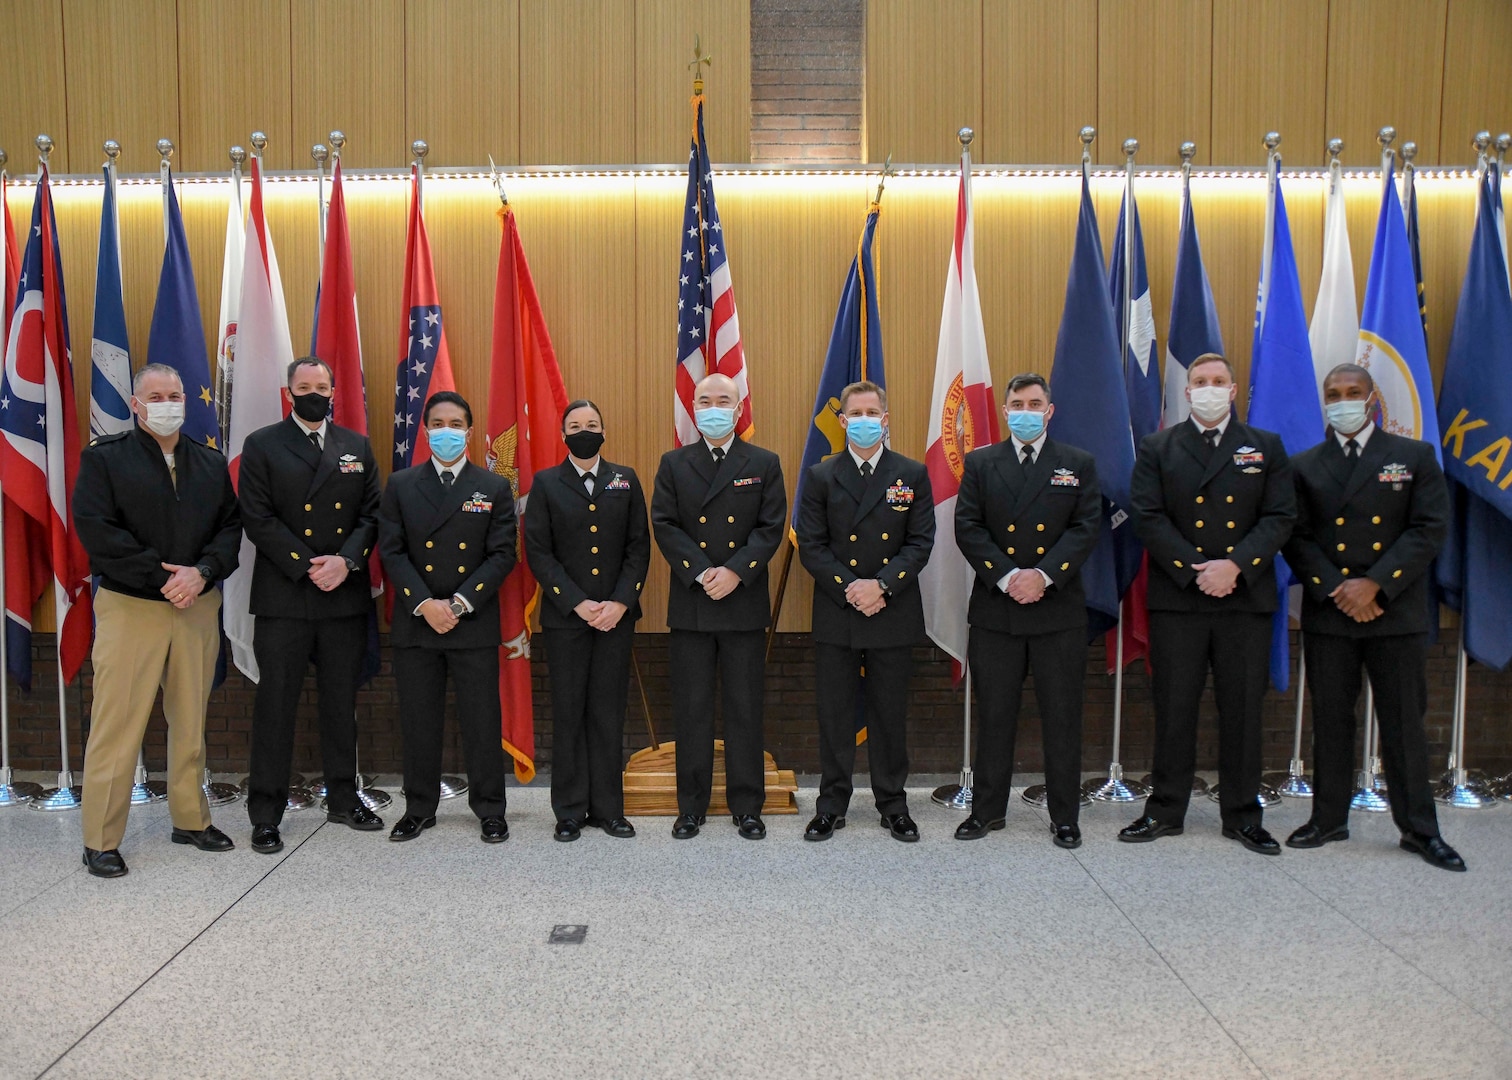 NMCCL welcomed eight Officer Candidates as part of the Medical Center's Interservice Physician Assistant Program. NMCCL will serve as a pilot site for Phase II of year-long program.